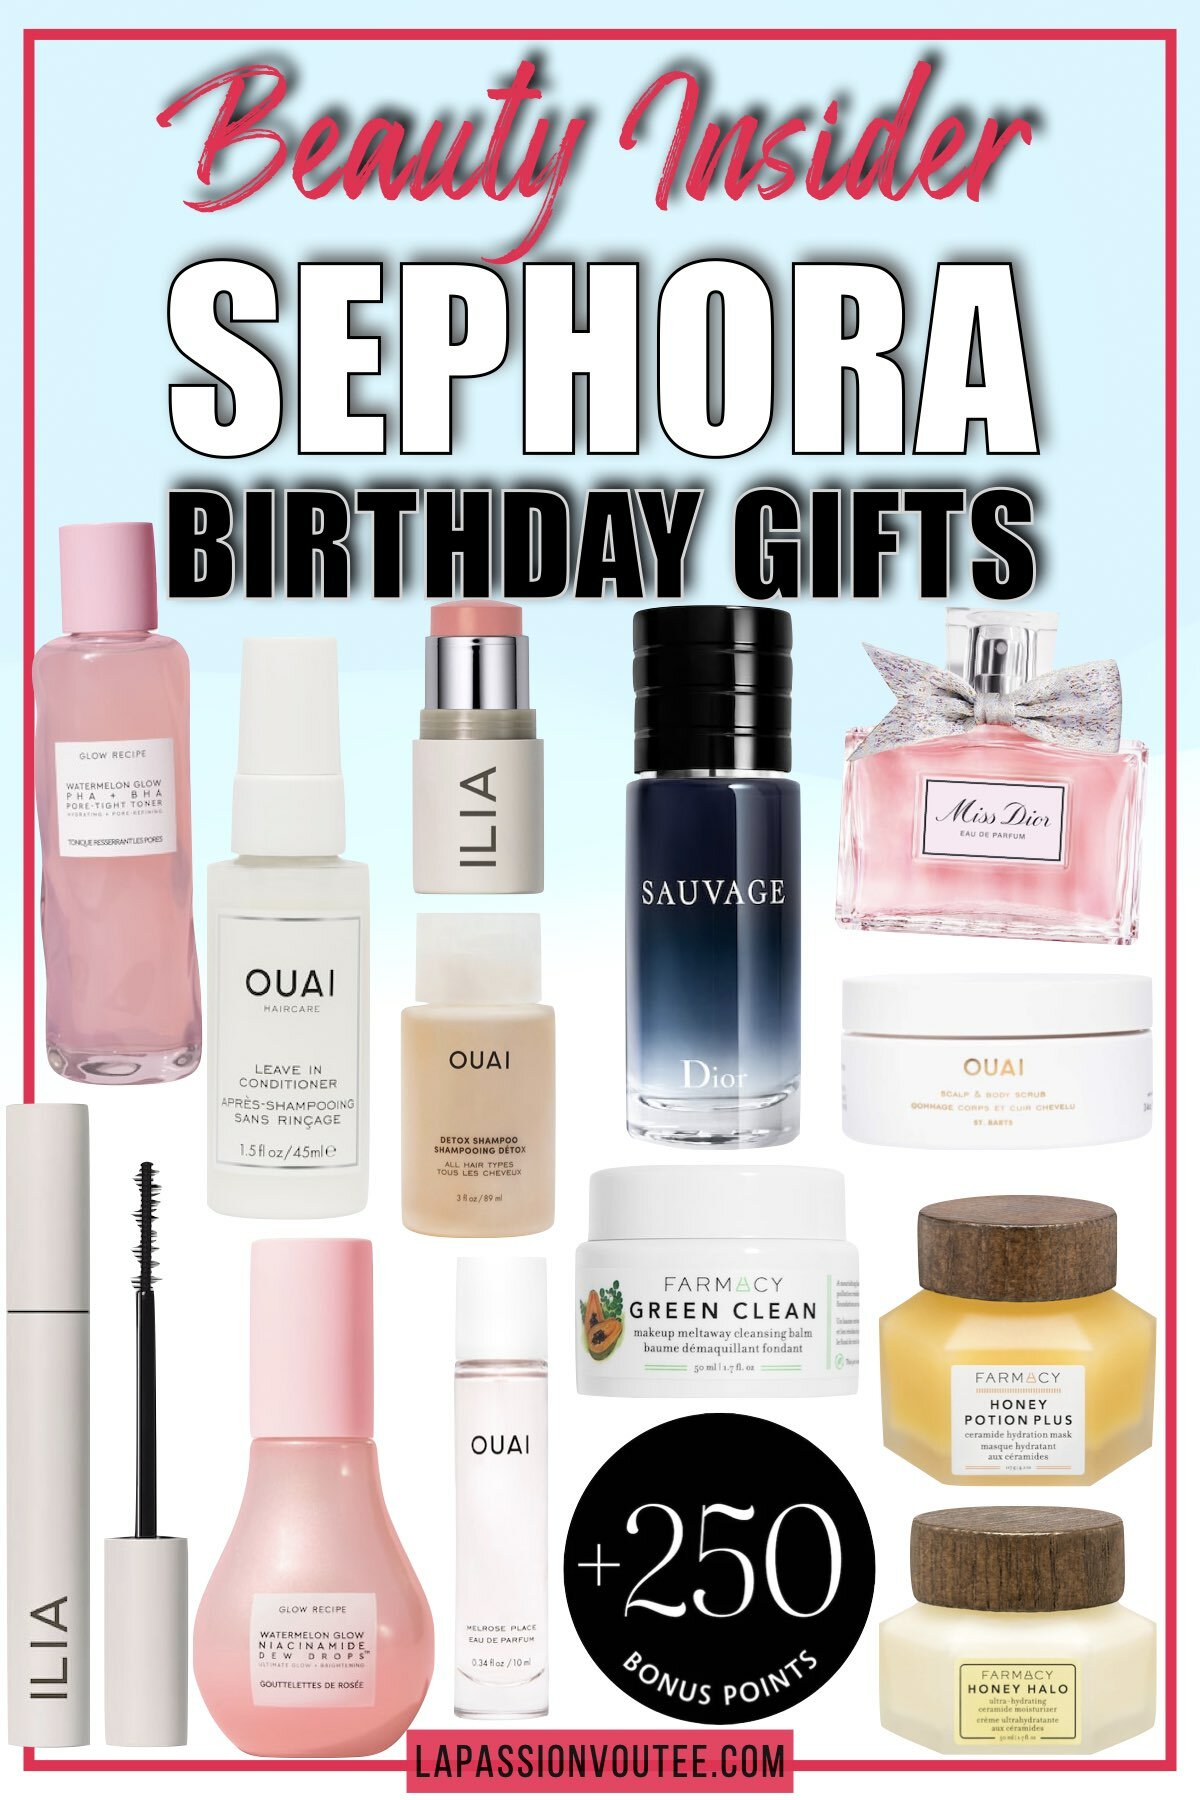 Sephora 2023 birthday gifts: Your ultimate guide to the best Sephora birthday gift of 2023. What free gift to pick and which one to skip!